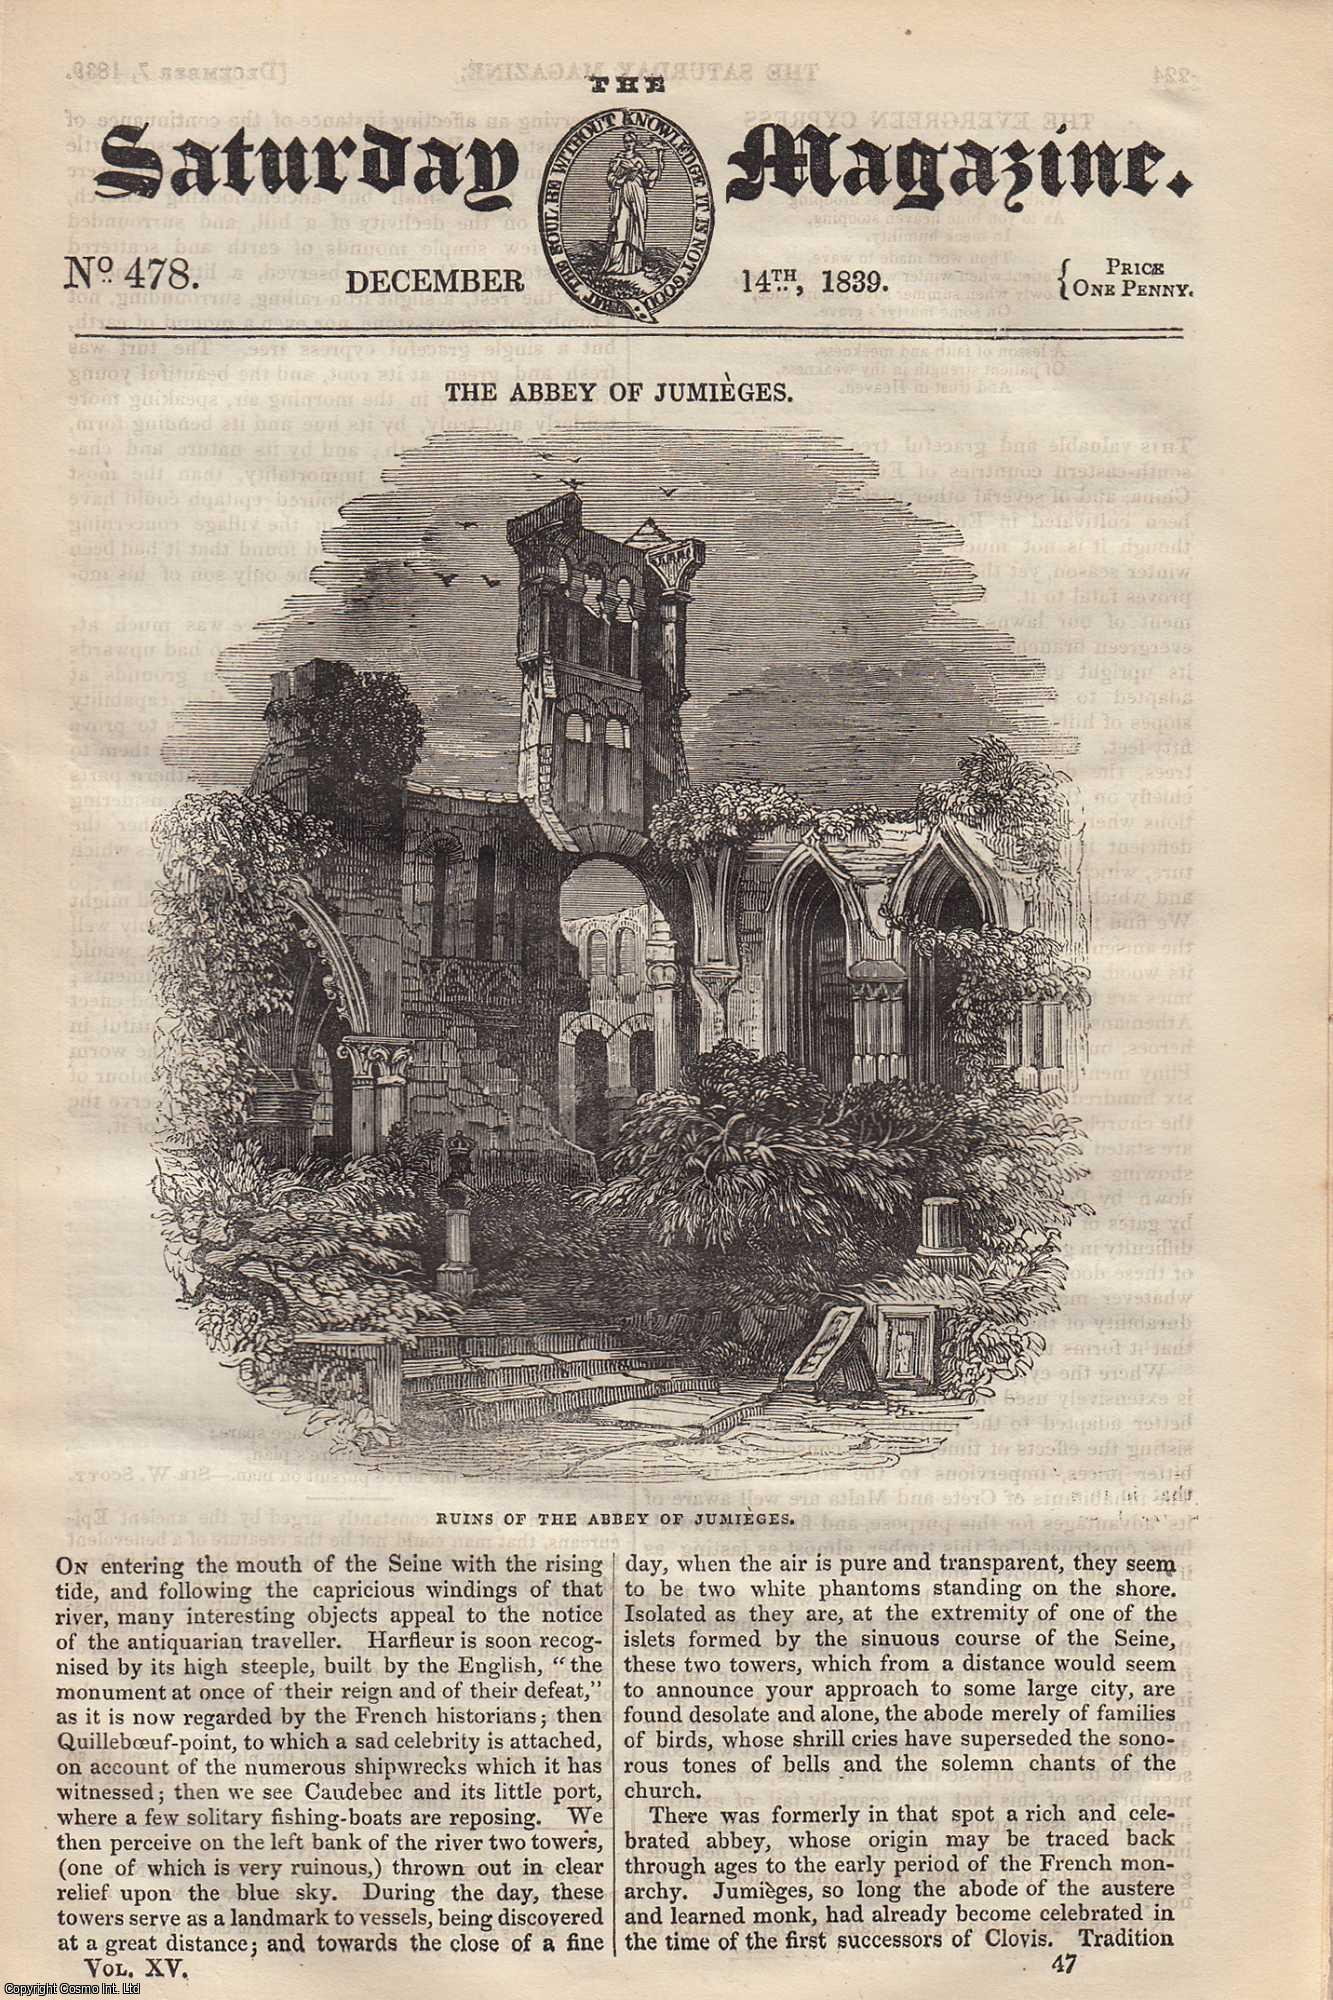 Saturday Magazine - The Abbey of Jumieges; The Custom of Wearing Finger Rings; The Water-Lilies of The Nile; The Circulation of The Blood, etc. Issue No. 478. December, 1839. A complete original weekly issue of the Saturday Magazine, 1839.